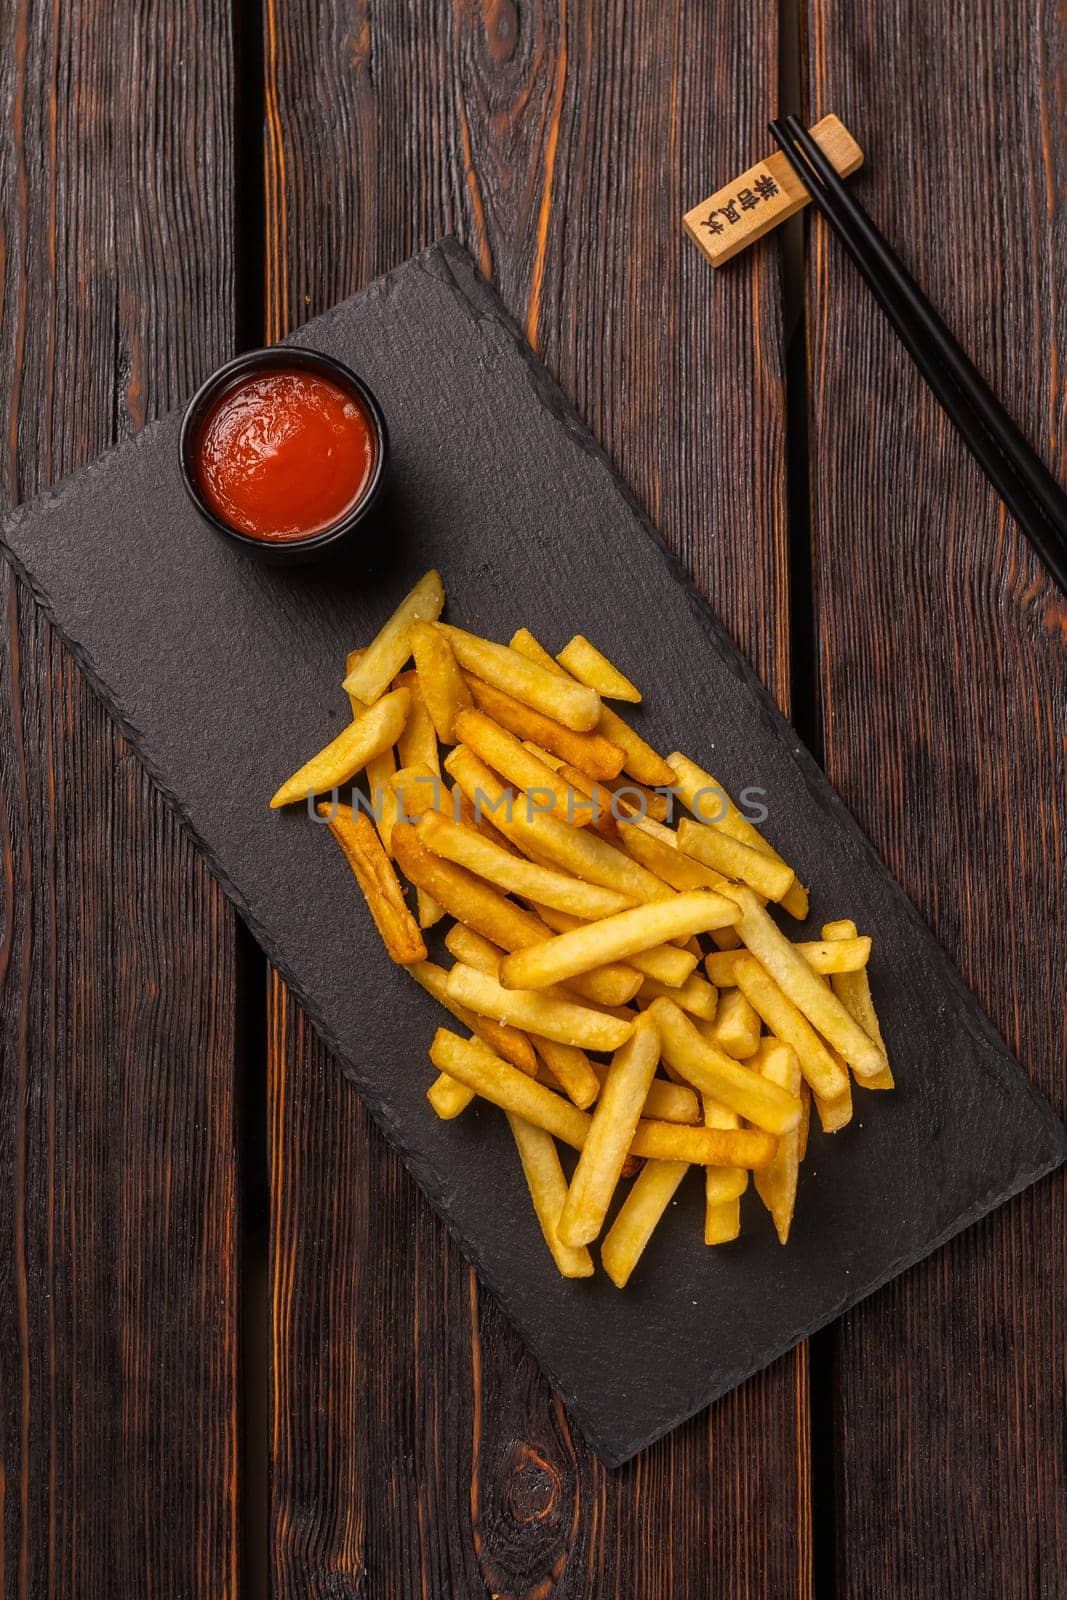 French fries with ketchup on dark wooden background top view - fast food and unhealthy eat concept by Satura86